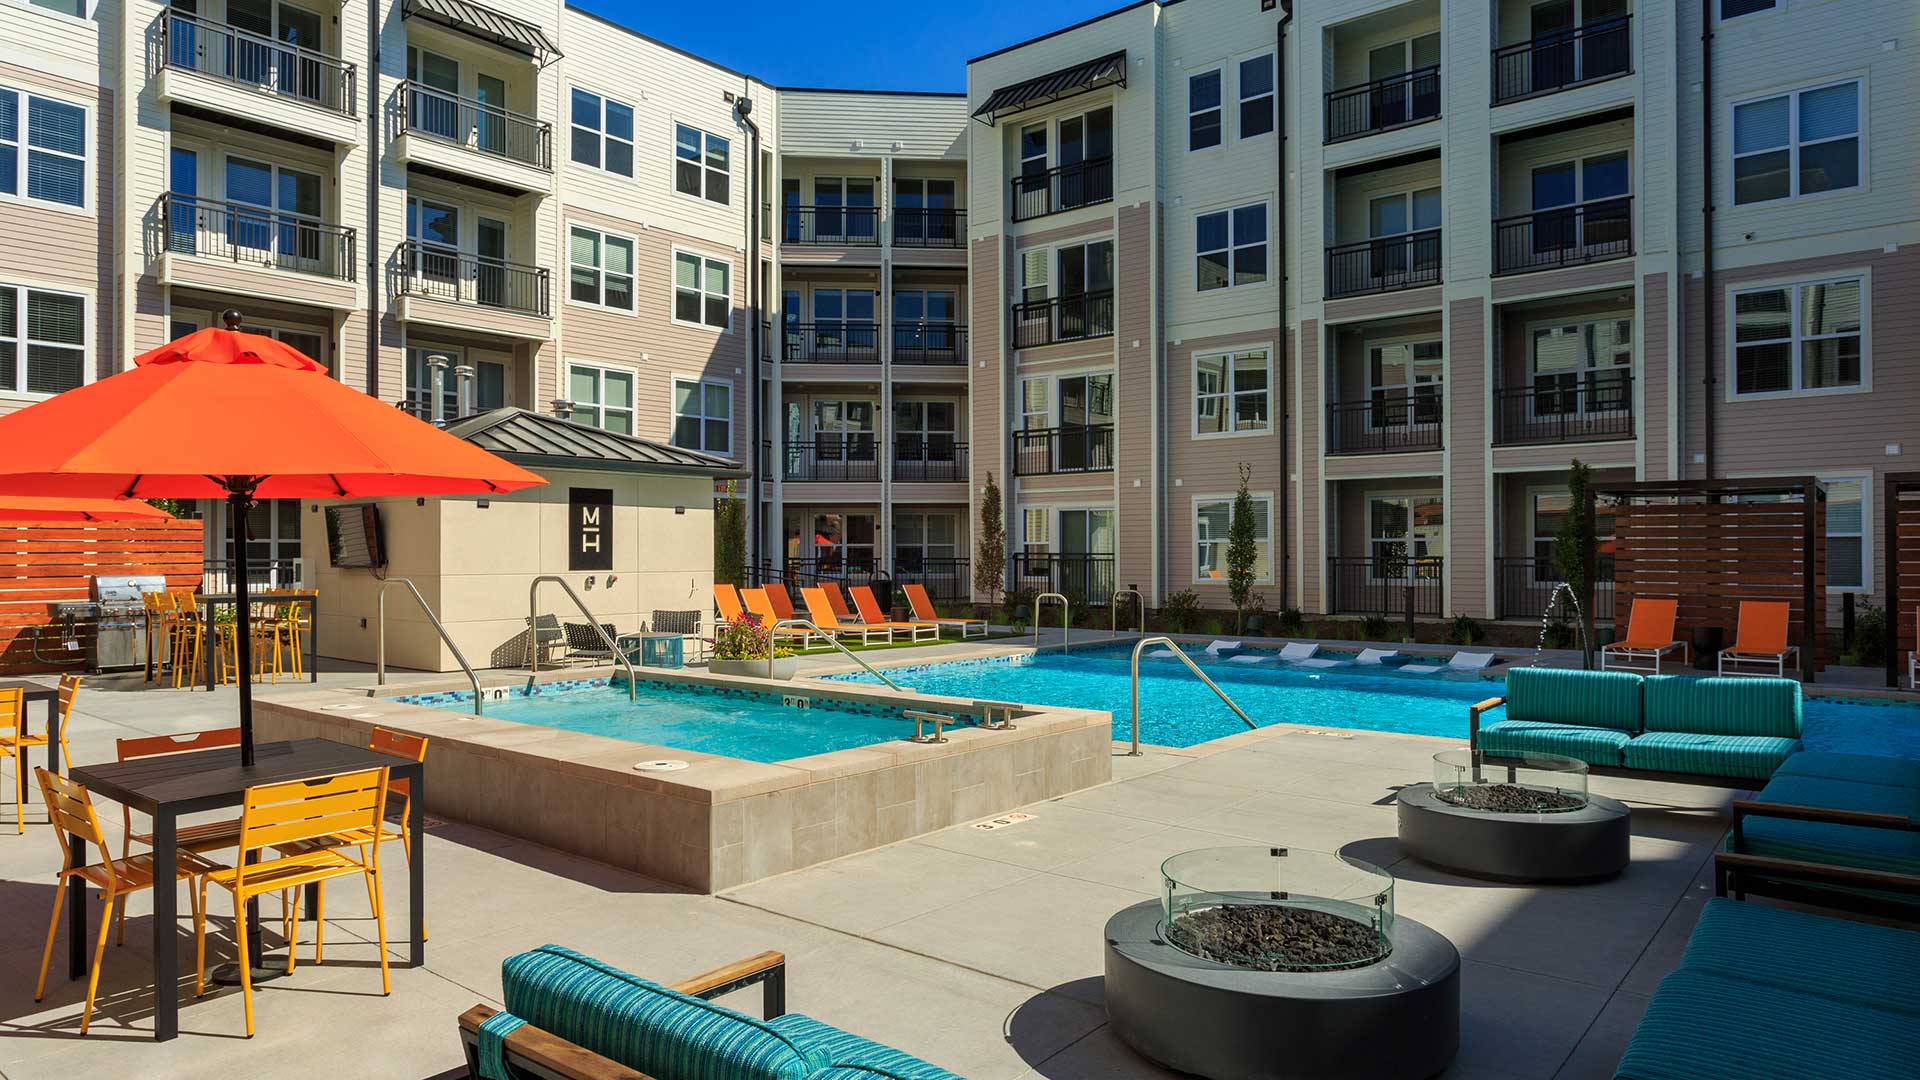 Standing in the courtyard looking across a sitting are with fire pits. The hot and pool are ahead with a grilling and seating area off to the left. The apartment building is seen in the background.